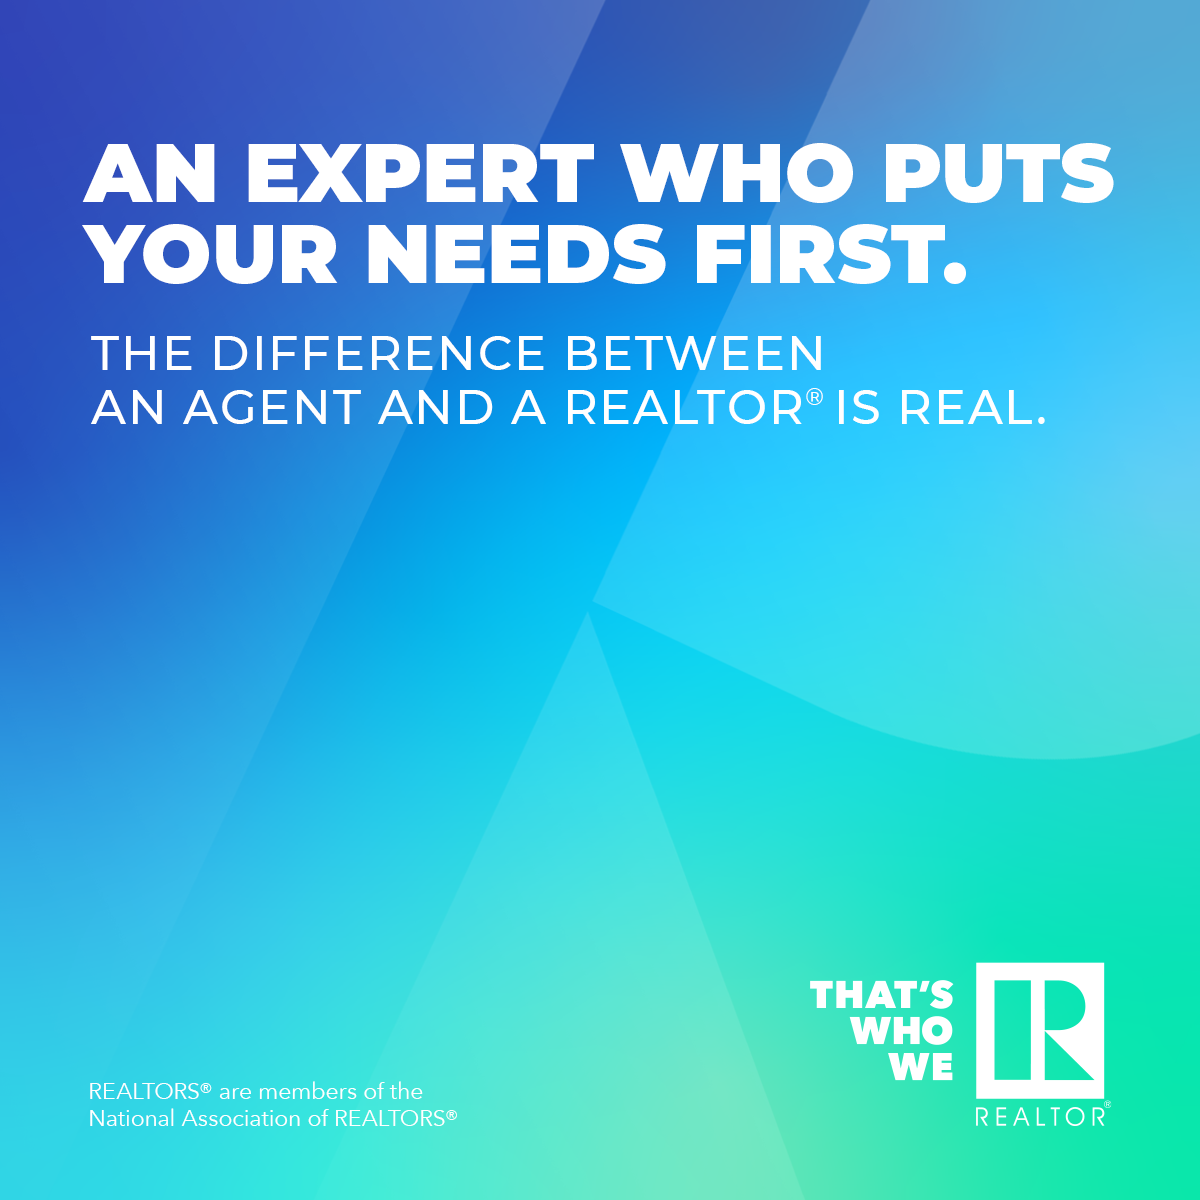 An expert who puts your needs first the difference between an agent and a realtor is real.